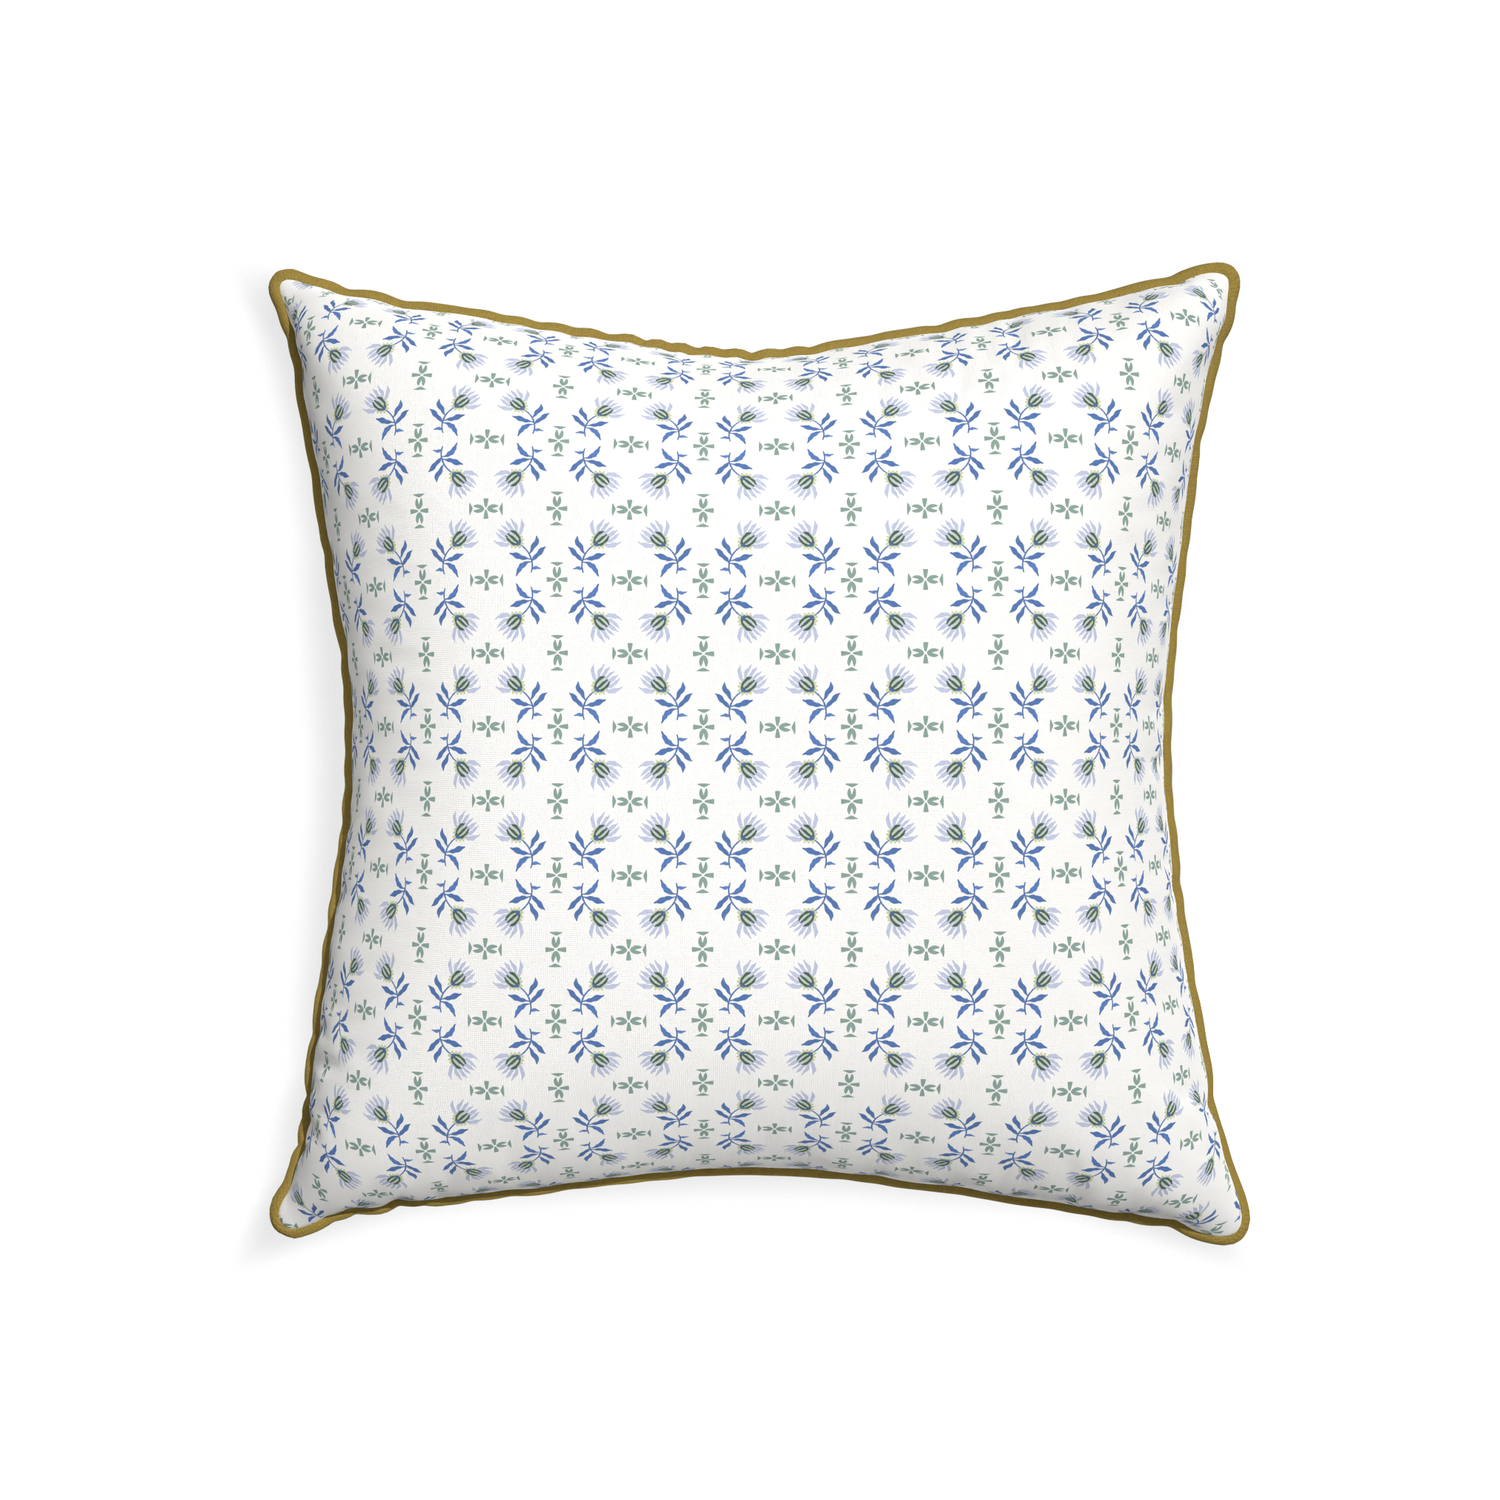 22-square lee custom blue & green floralpillow with c piping on white background